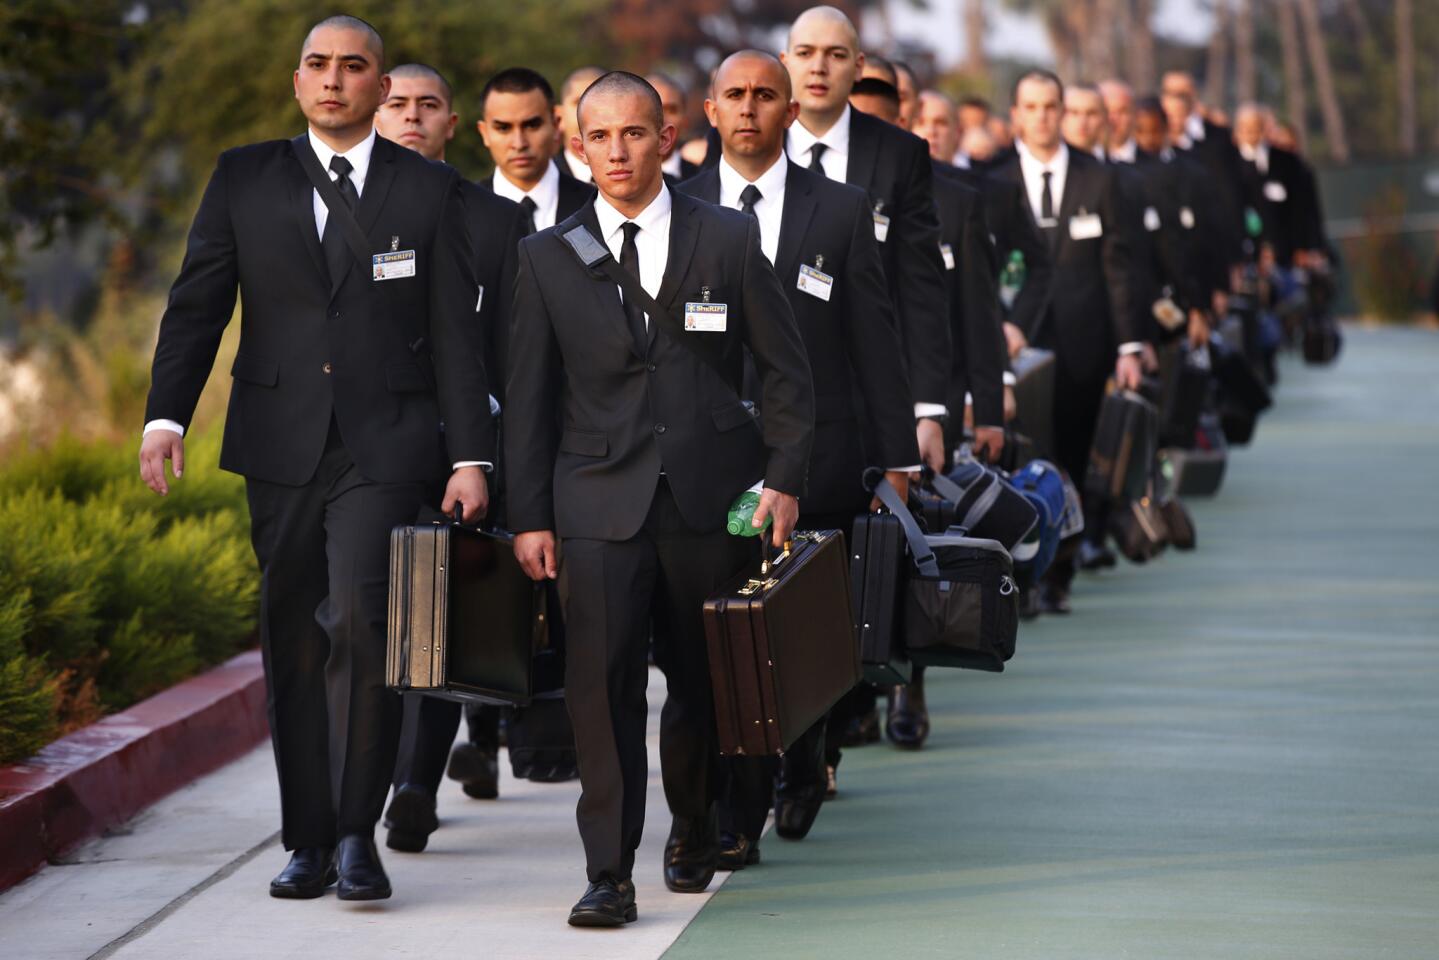 Los Angeles County Sheriff's Department recruits arrive for the first day of academy at the Biscailuz Training Center in Monterey Park all dressed in black suits, for "Black Monday." After a brief classroom session drill instructors begin the yelling, and the class assembles on the "Grinder" for exercises and training.